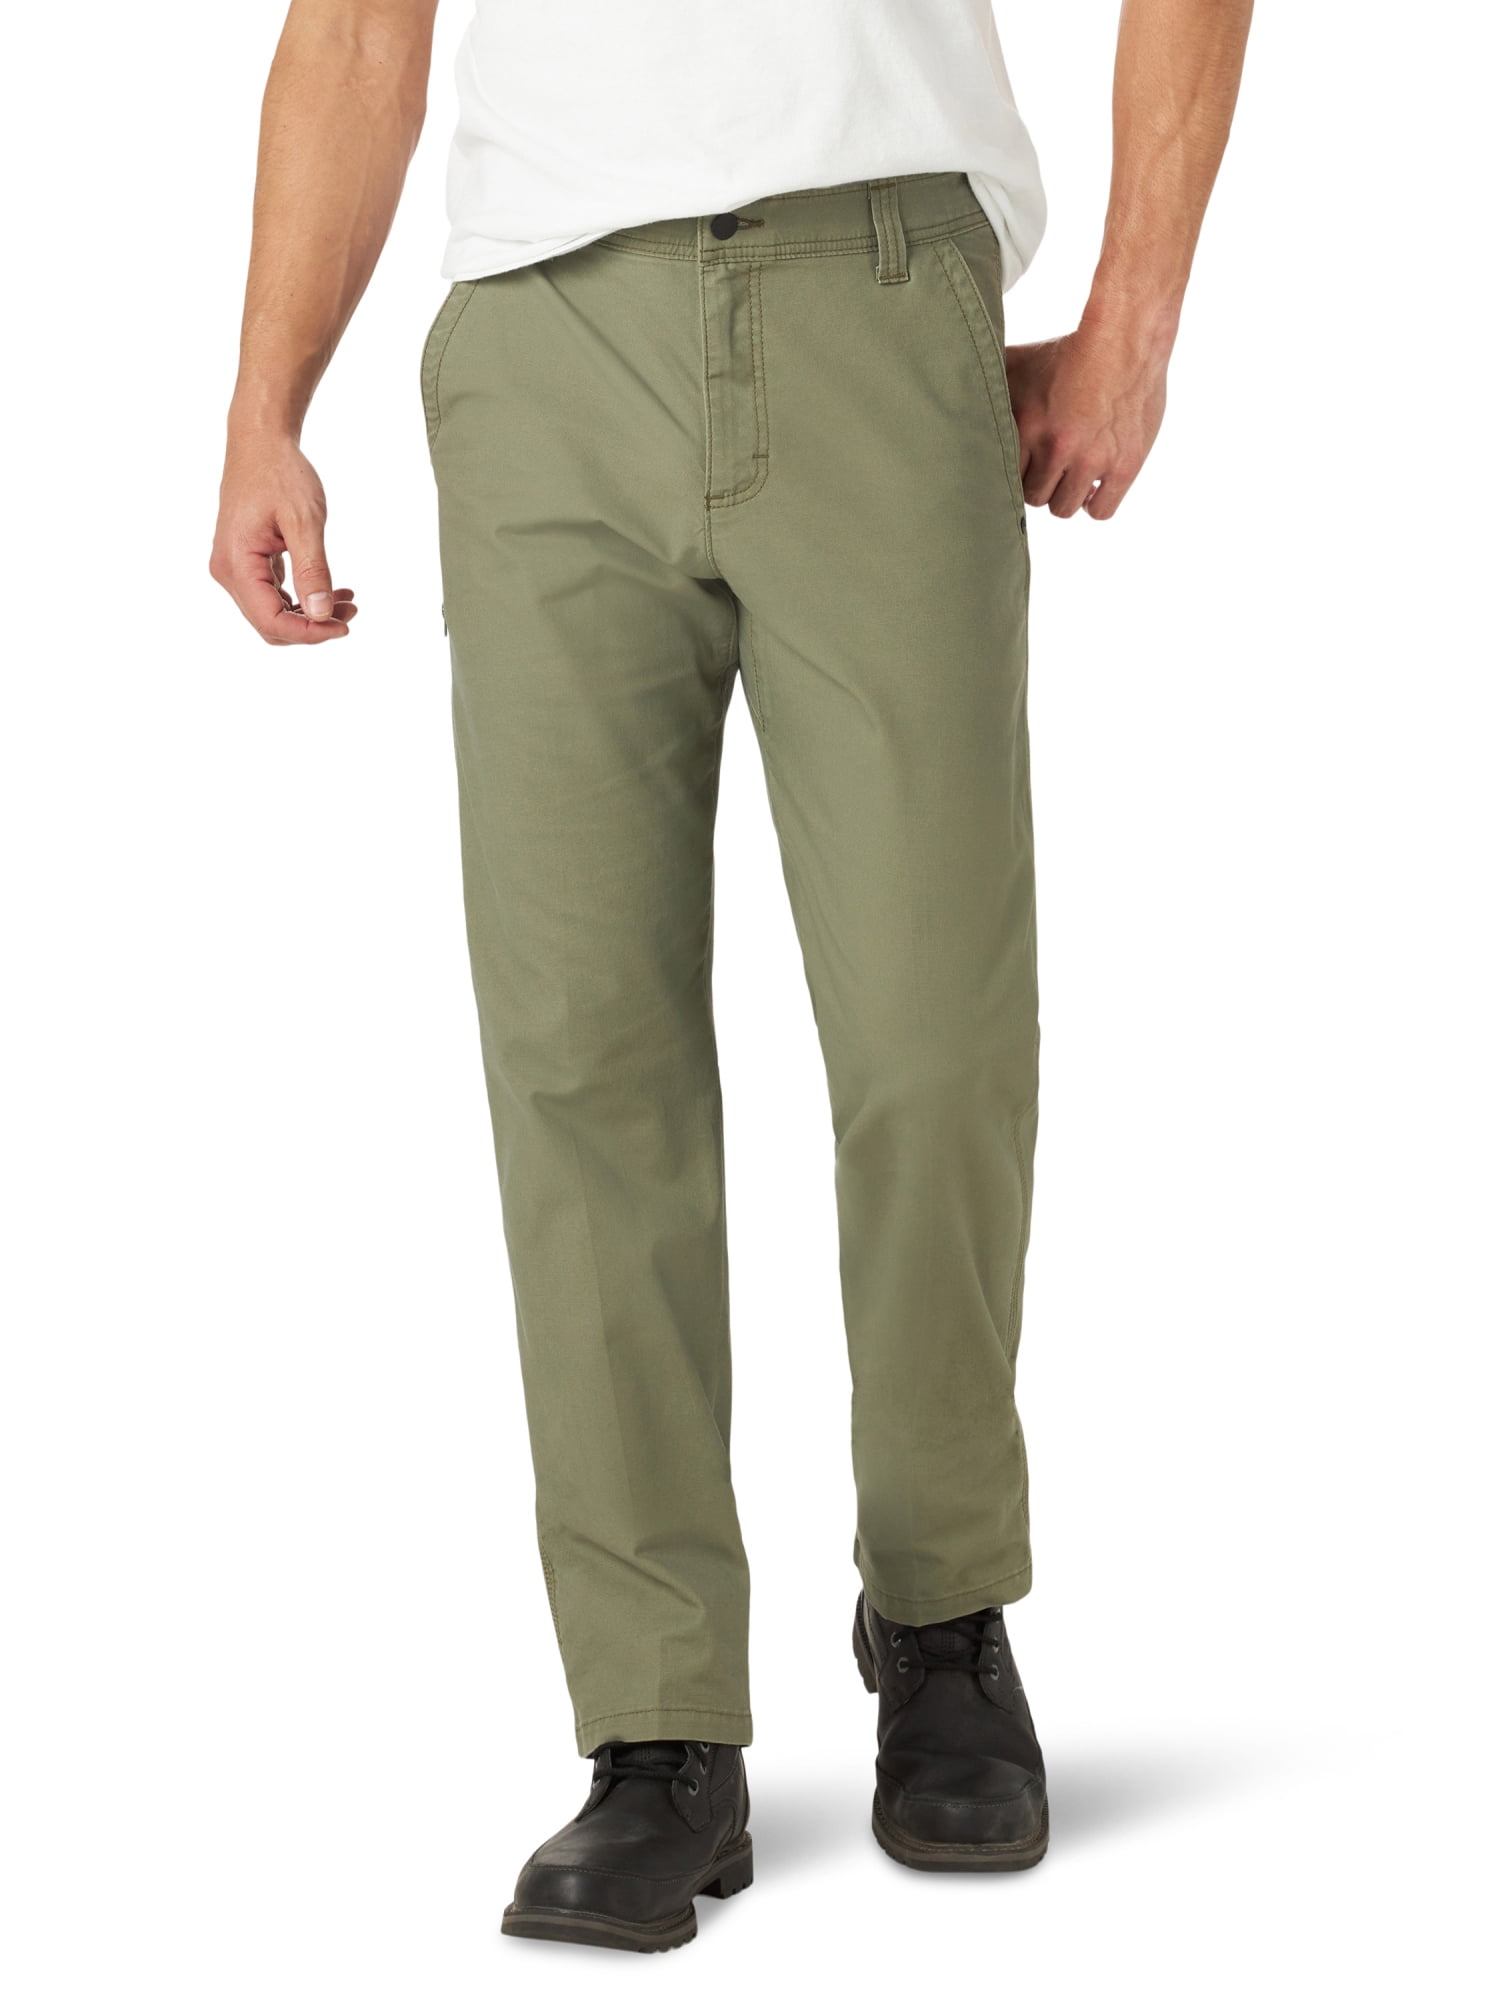 5.11 Tactical Mens Ripstop Cargo Pants Navy Forest Green Size 42x34 